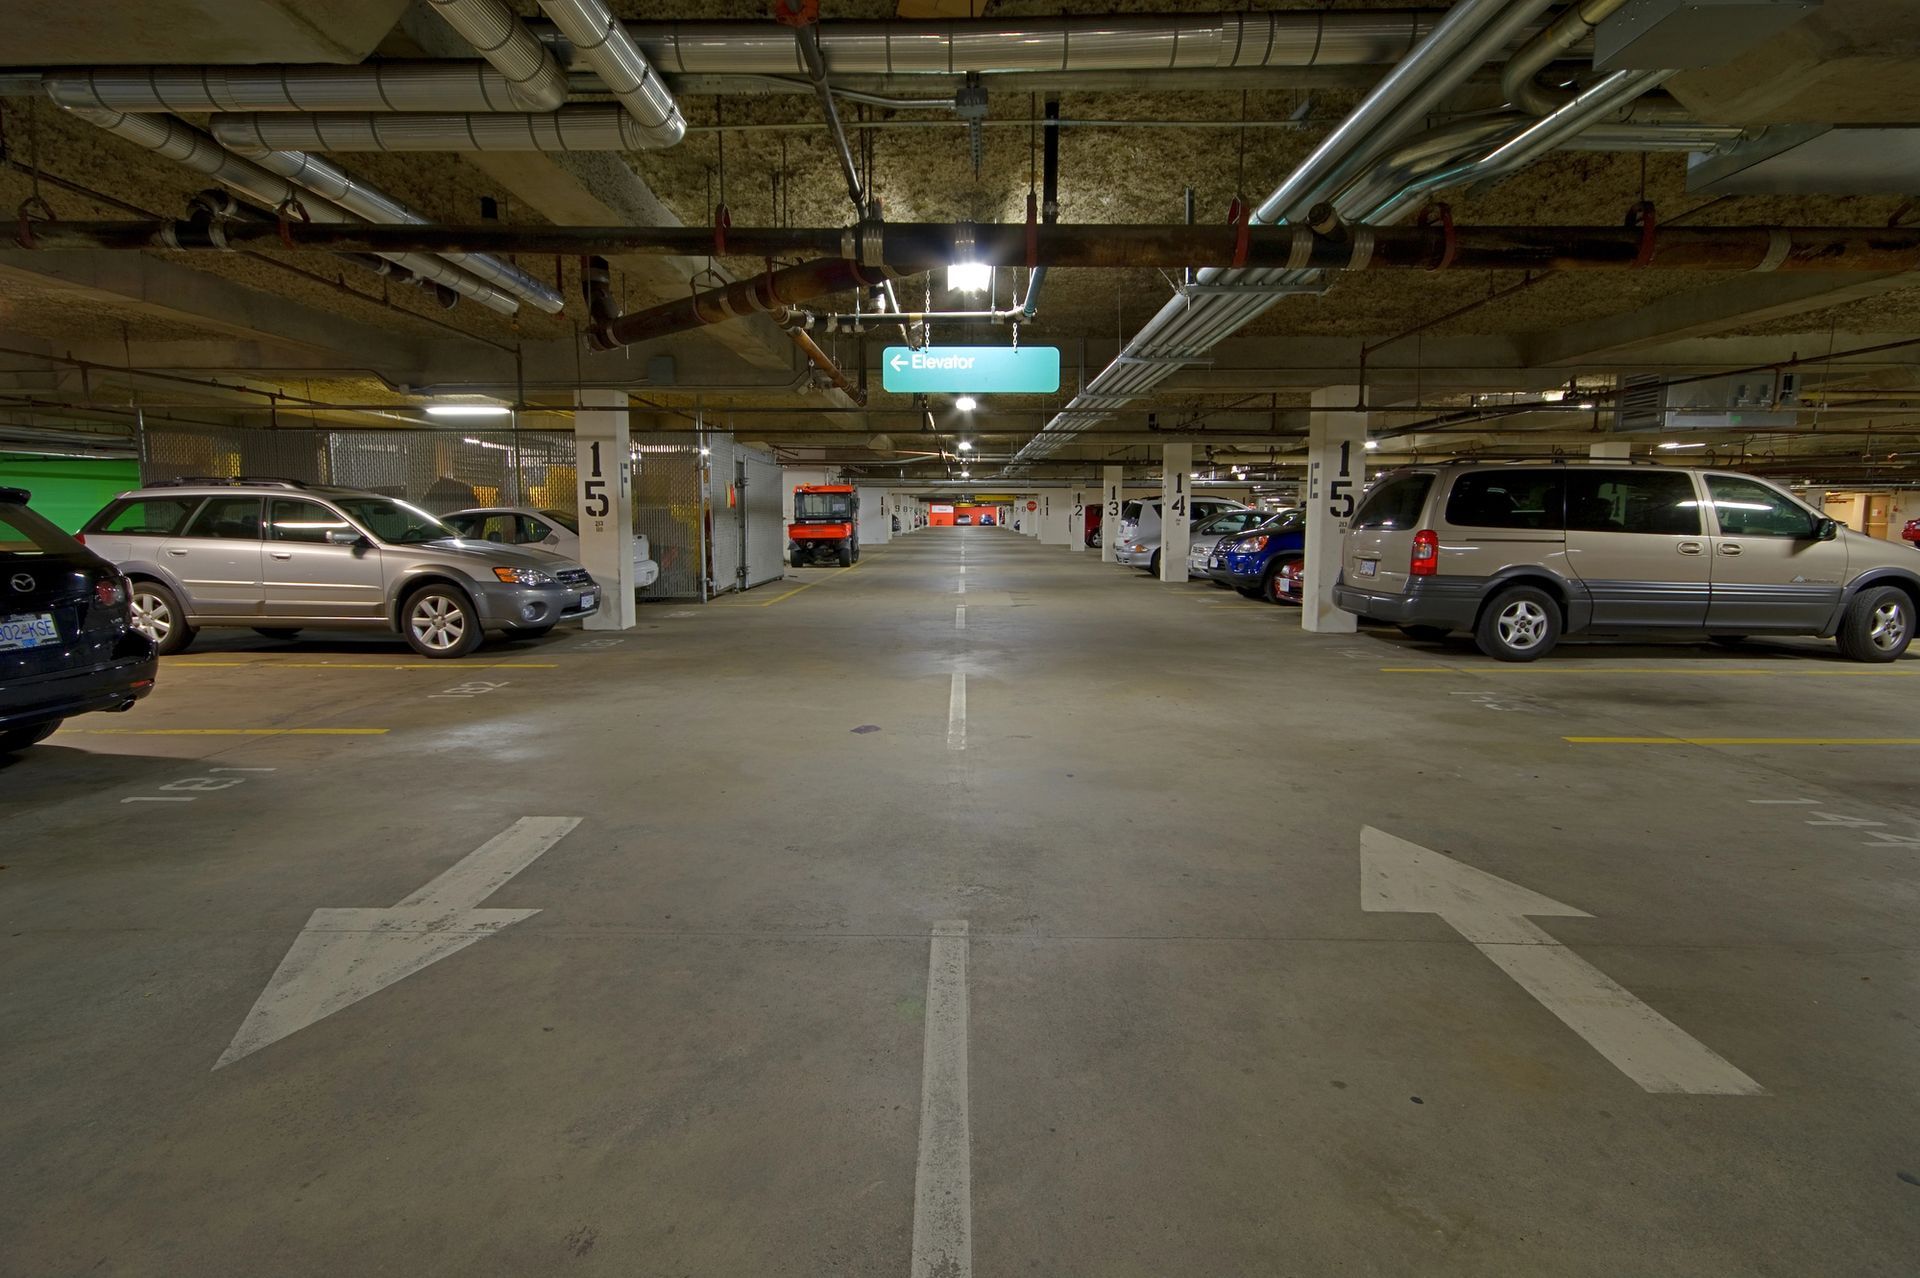 A parking garage filled with cars and arrows pointing in opposite directions.